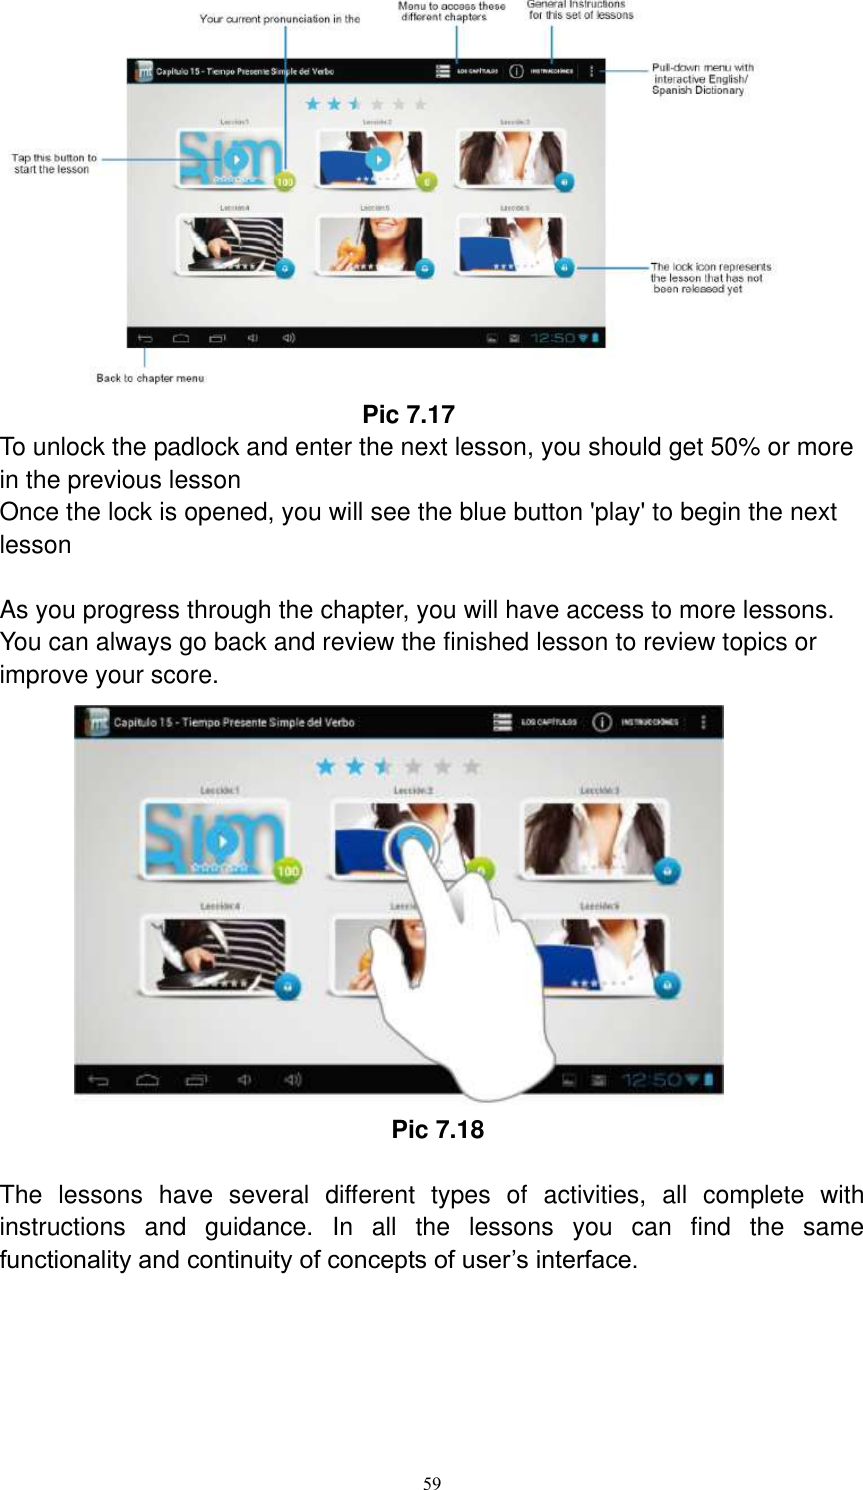      59                               Pic 7.17 To unlock the padlock and enter the next lesson, you should get 50% or more in the previous lesson Once the lock is opened, you will see the blue button &apos;play&apos; to begin the next lesson  As you progress through the chapter, you will have access to more lessons. You can always go back and review the finished lesson to review topics or improve your score.                                                             Pic 7.18  The  lessons  have  several  different  types  of  activities,  all  complete  with instructions  and  guidance.  In  all  the  lessons  you  can  find  the  same functionality and continuity of concepts of user’s interface.  